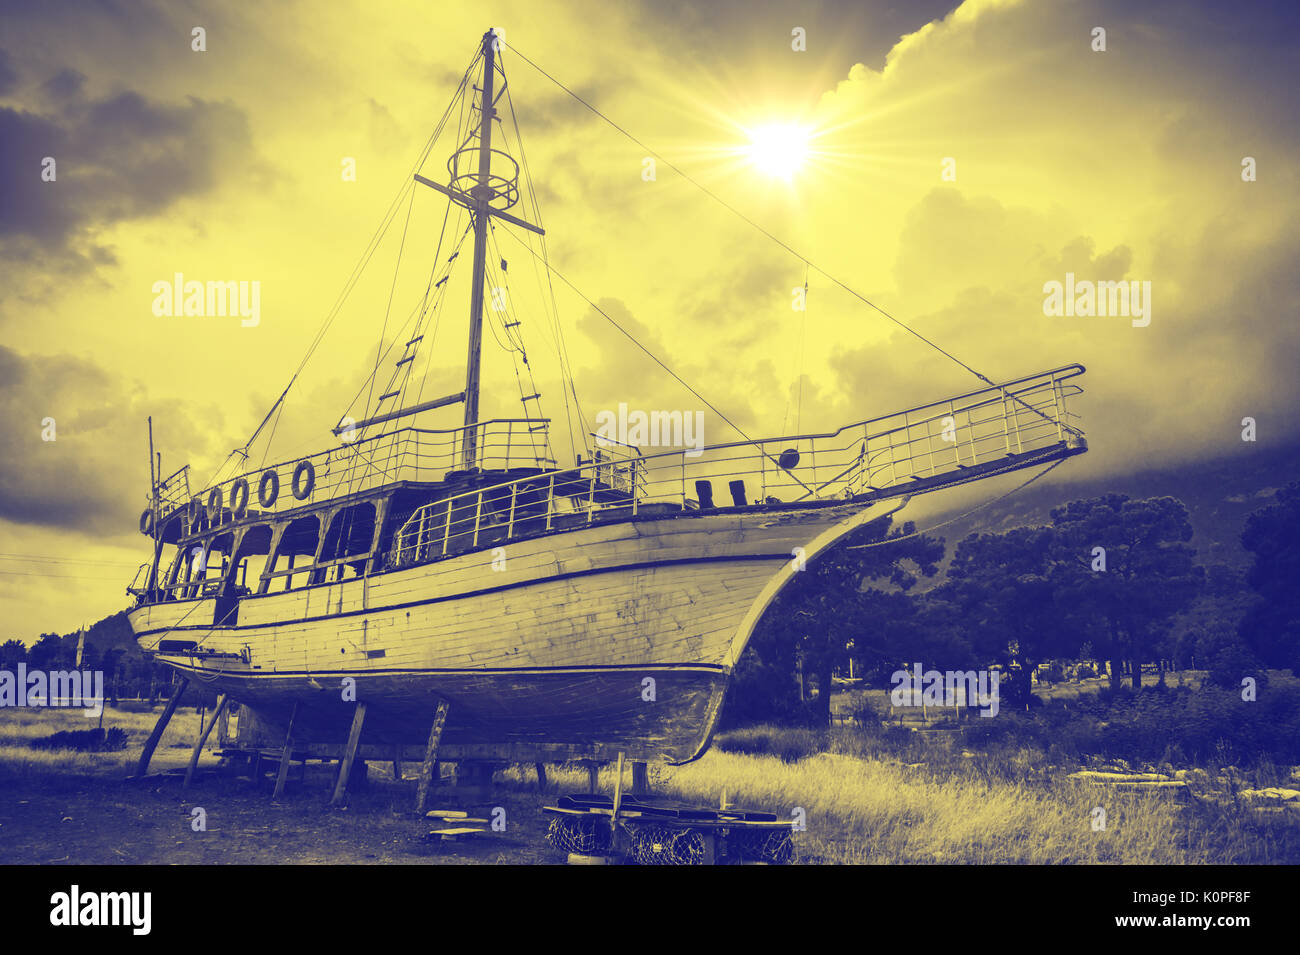 Old sailboat in the sun. Yellow and blue tinting. Stock Photo